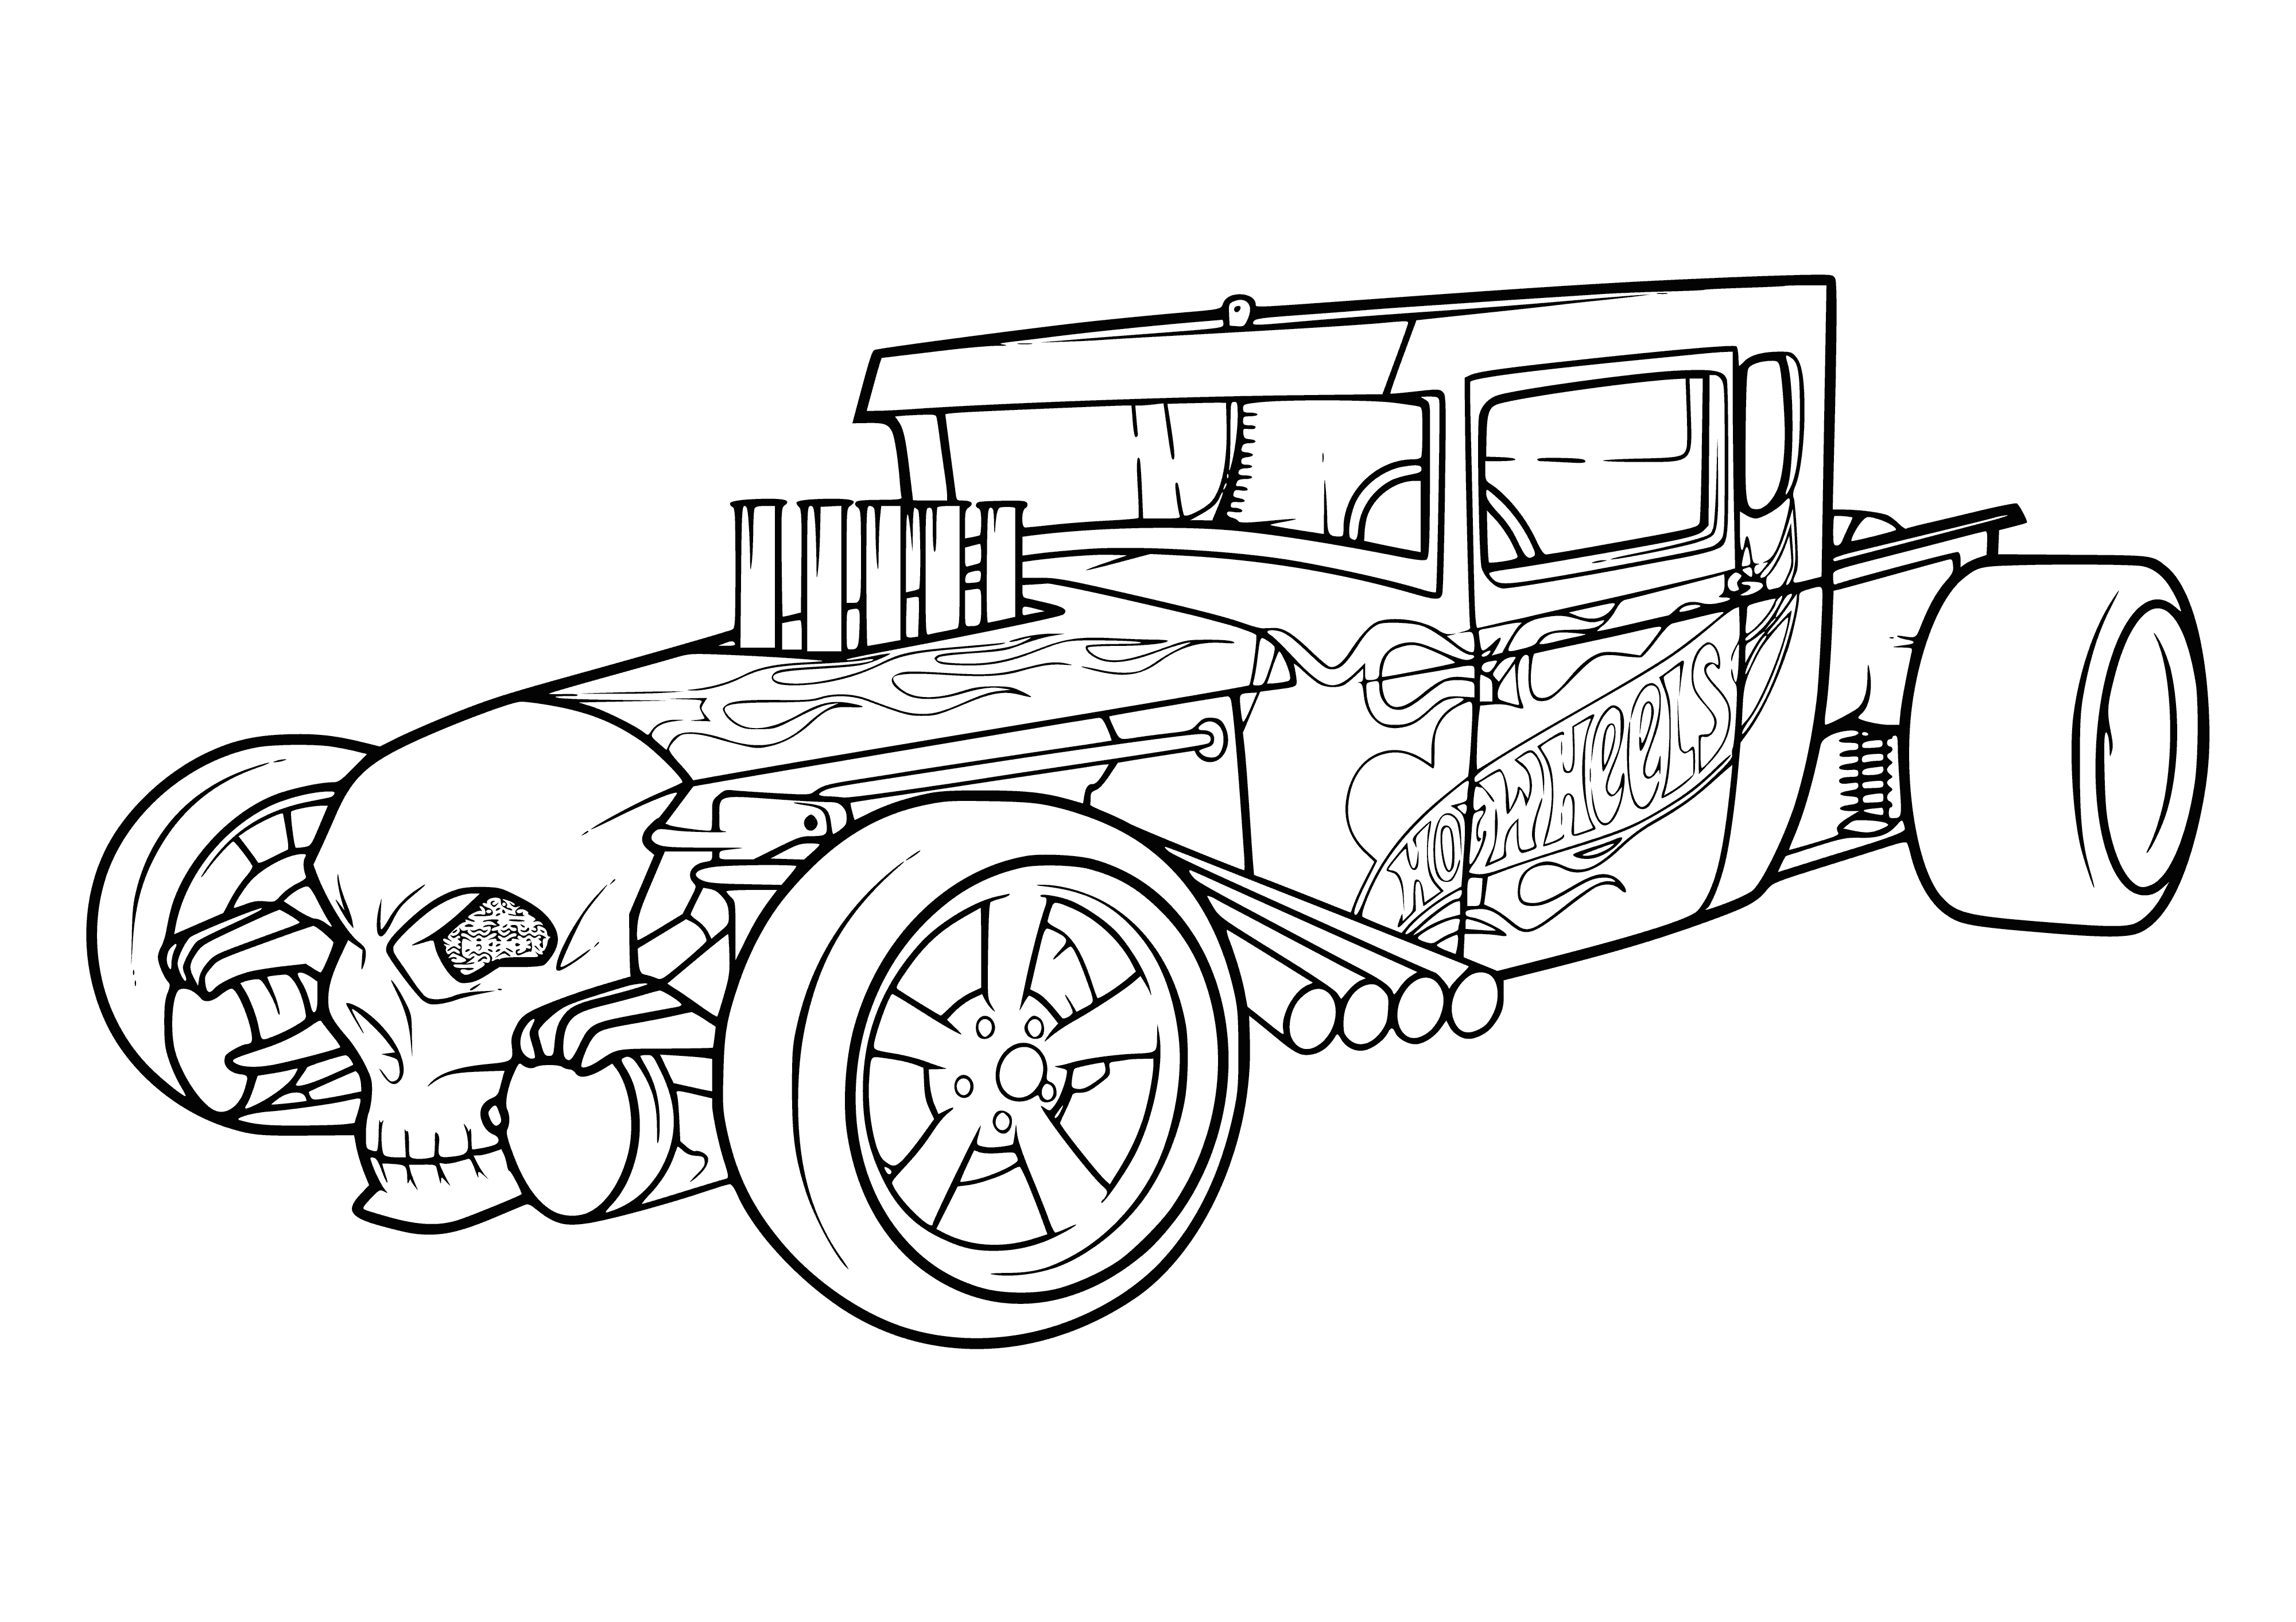 Roadster car coloring page